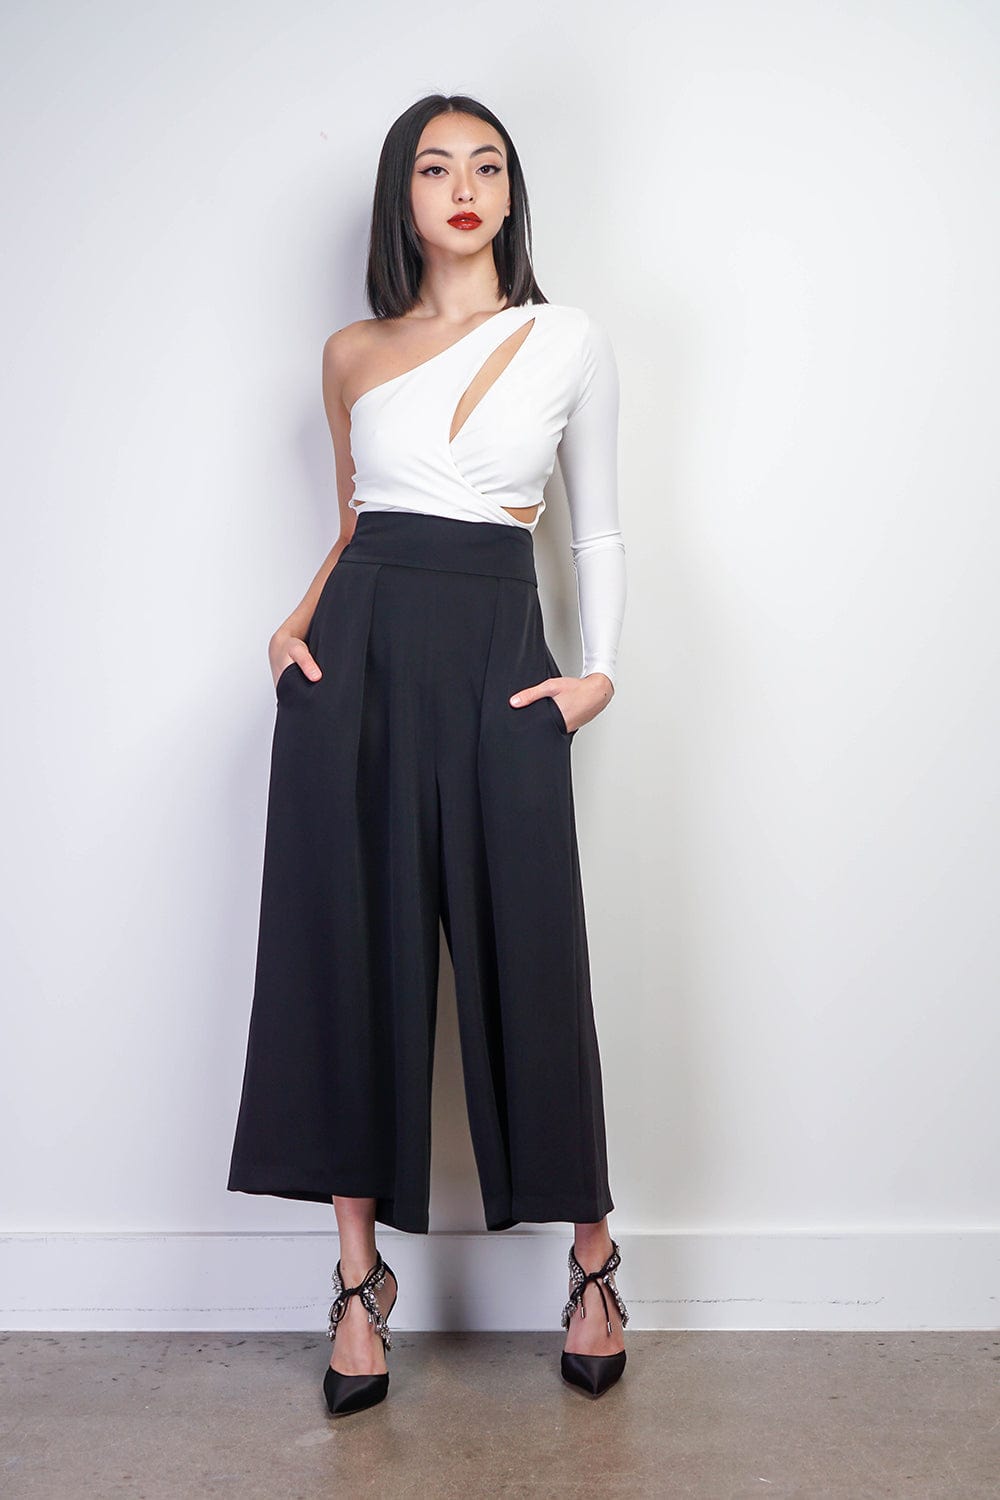 Winter Capsule Collection Tagged high waisted - Chloe Dao